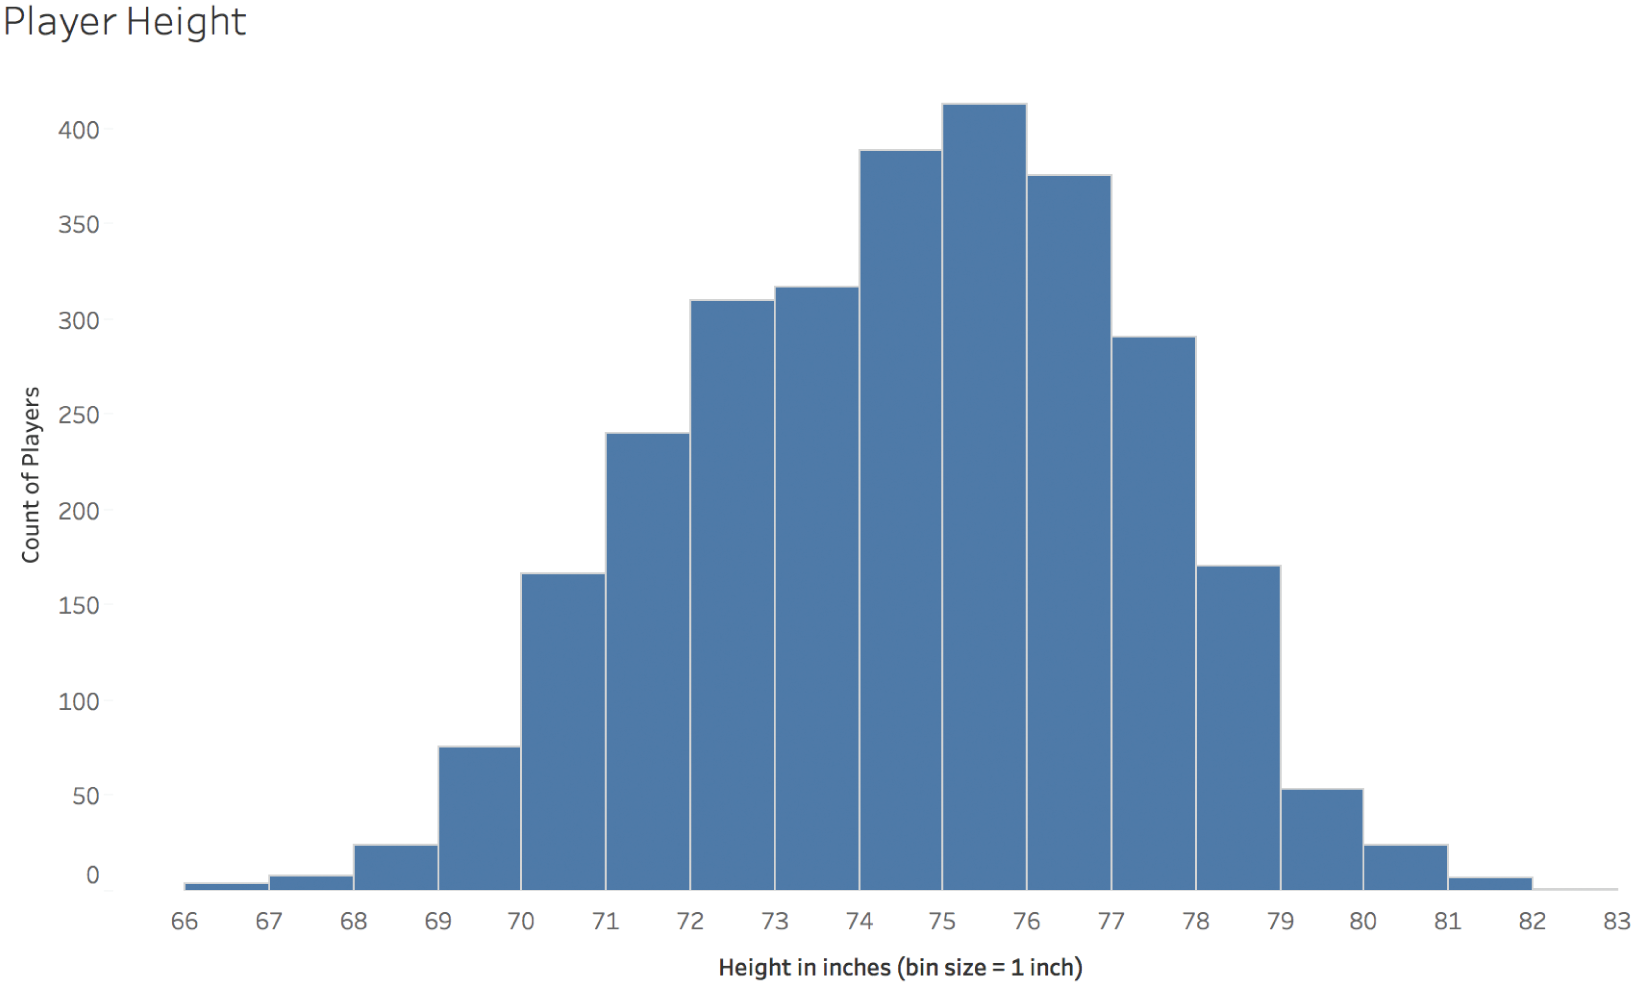 Histogram depicting the player heights, in inches, of American Football players.